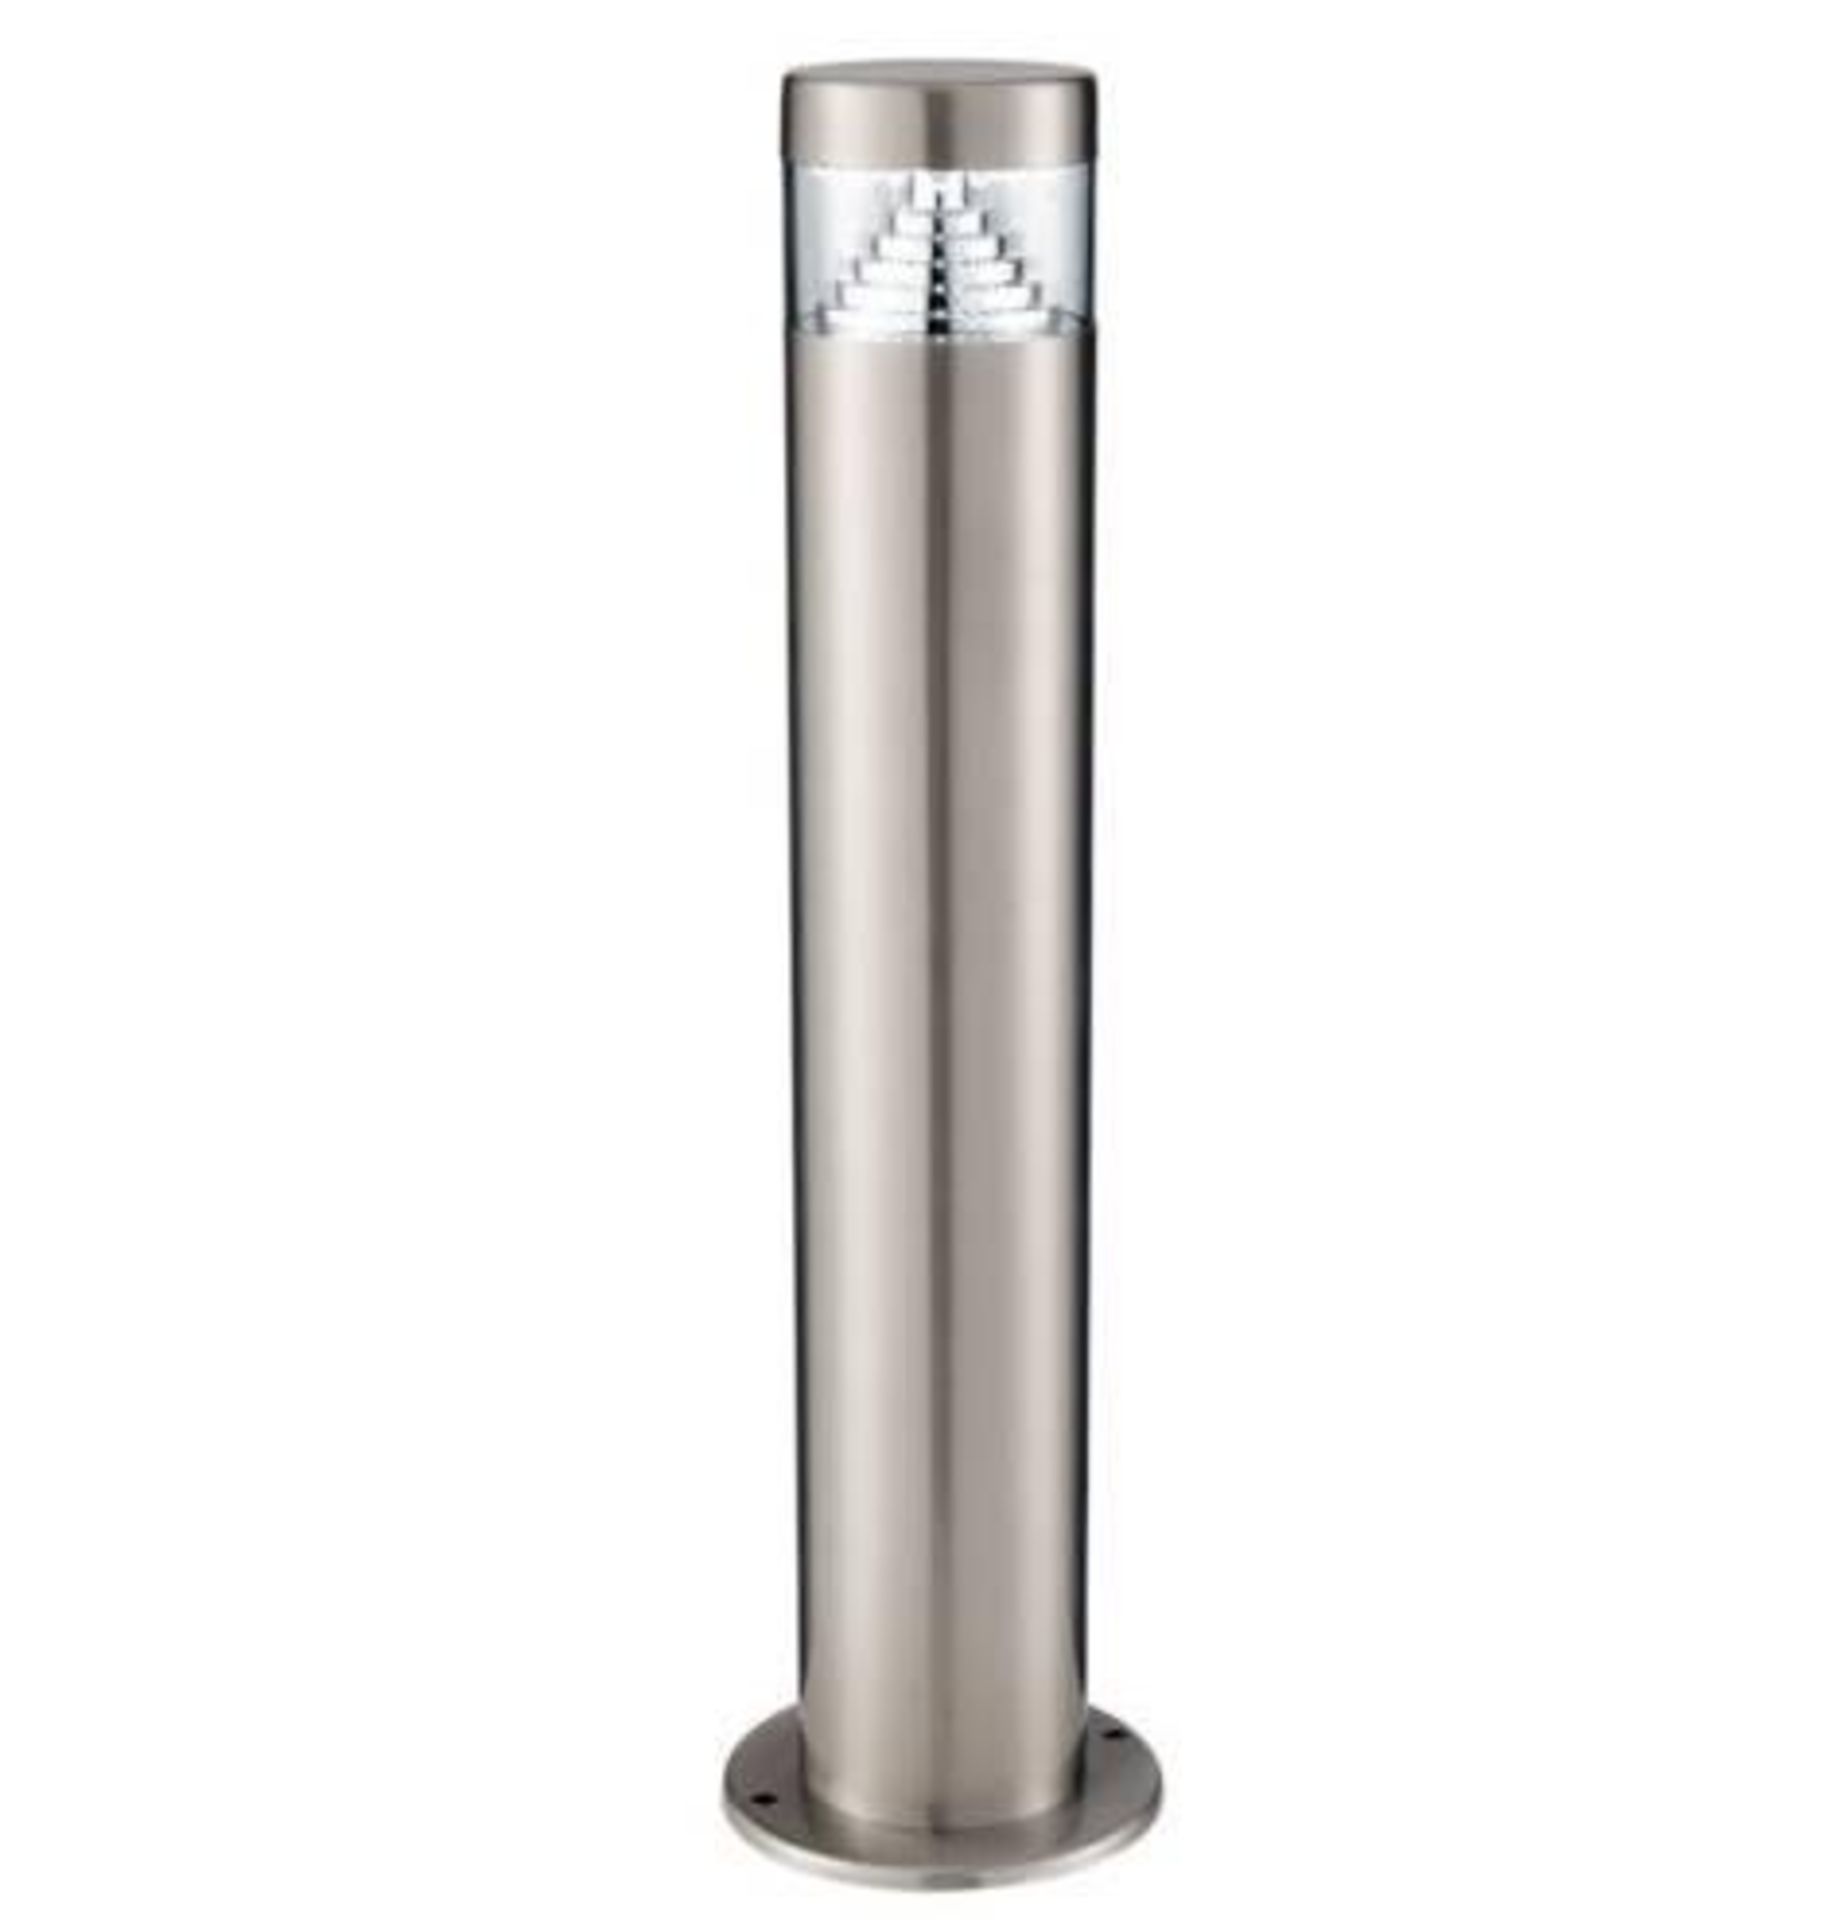 1 x Stainless Steel Ip44 LED Outdoor Post Light With Clear Polycarbonate Diffuser - New Boxed Stock - Image 2 of 2